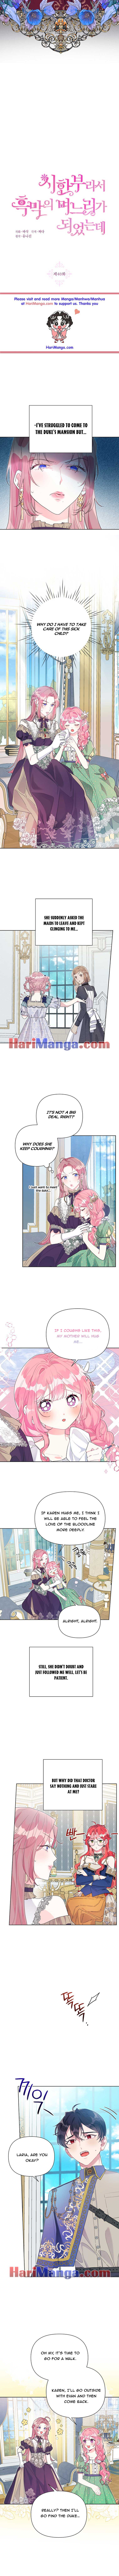 The Archvillain's Daughter In Law - Page 2